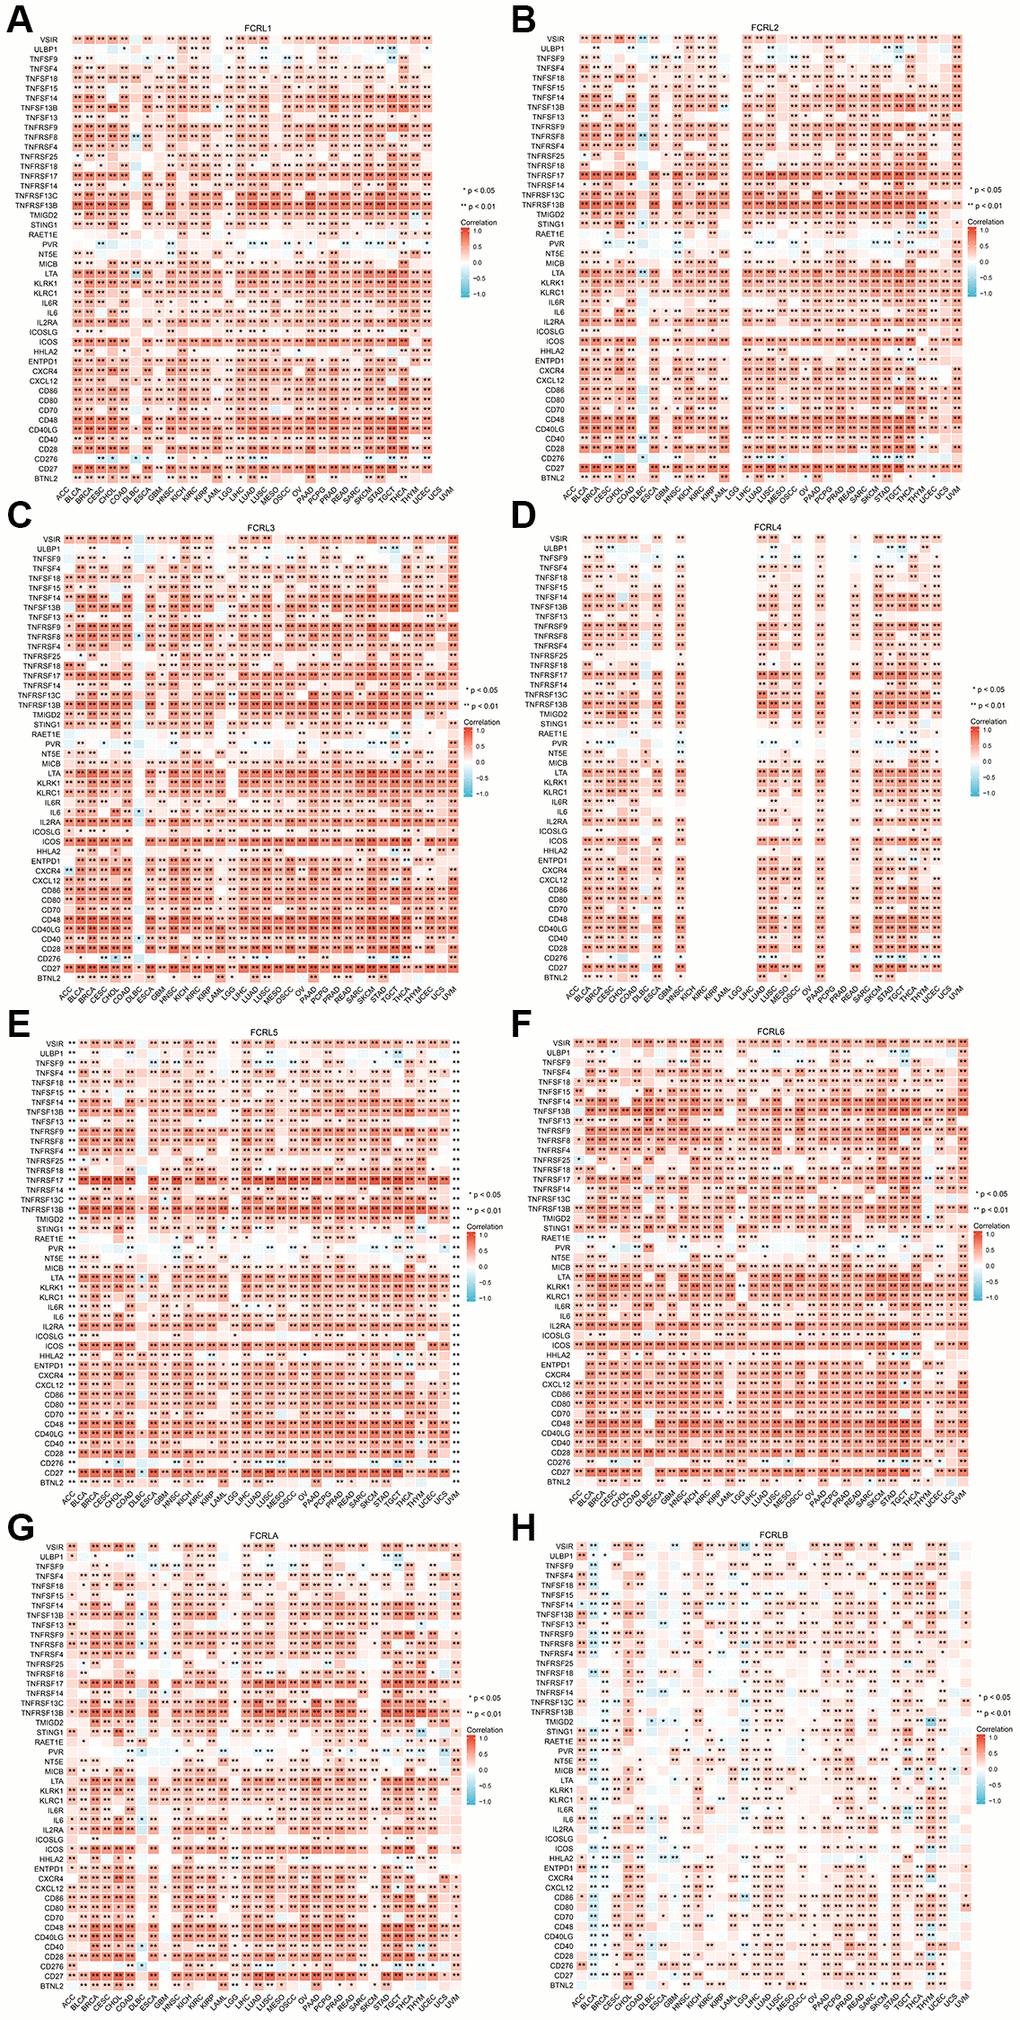 Correlation of FCRL family genes with markers of immunostimulators in pan-cancer. Correlations between (A) FCRL1, (B) FCRL2, (C) FCRL3, (D) FCRL4, (E) FCRL5, (F) FCRL6, (G) FCRLA, (H) FCRLB expression and markers of immunostimulators. ∗p ∗∗p 